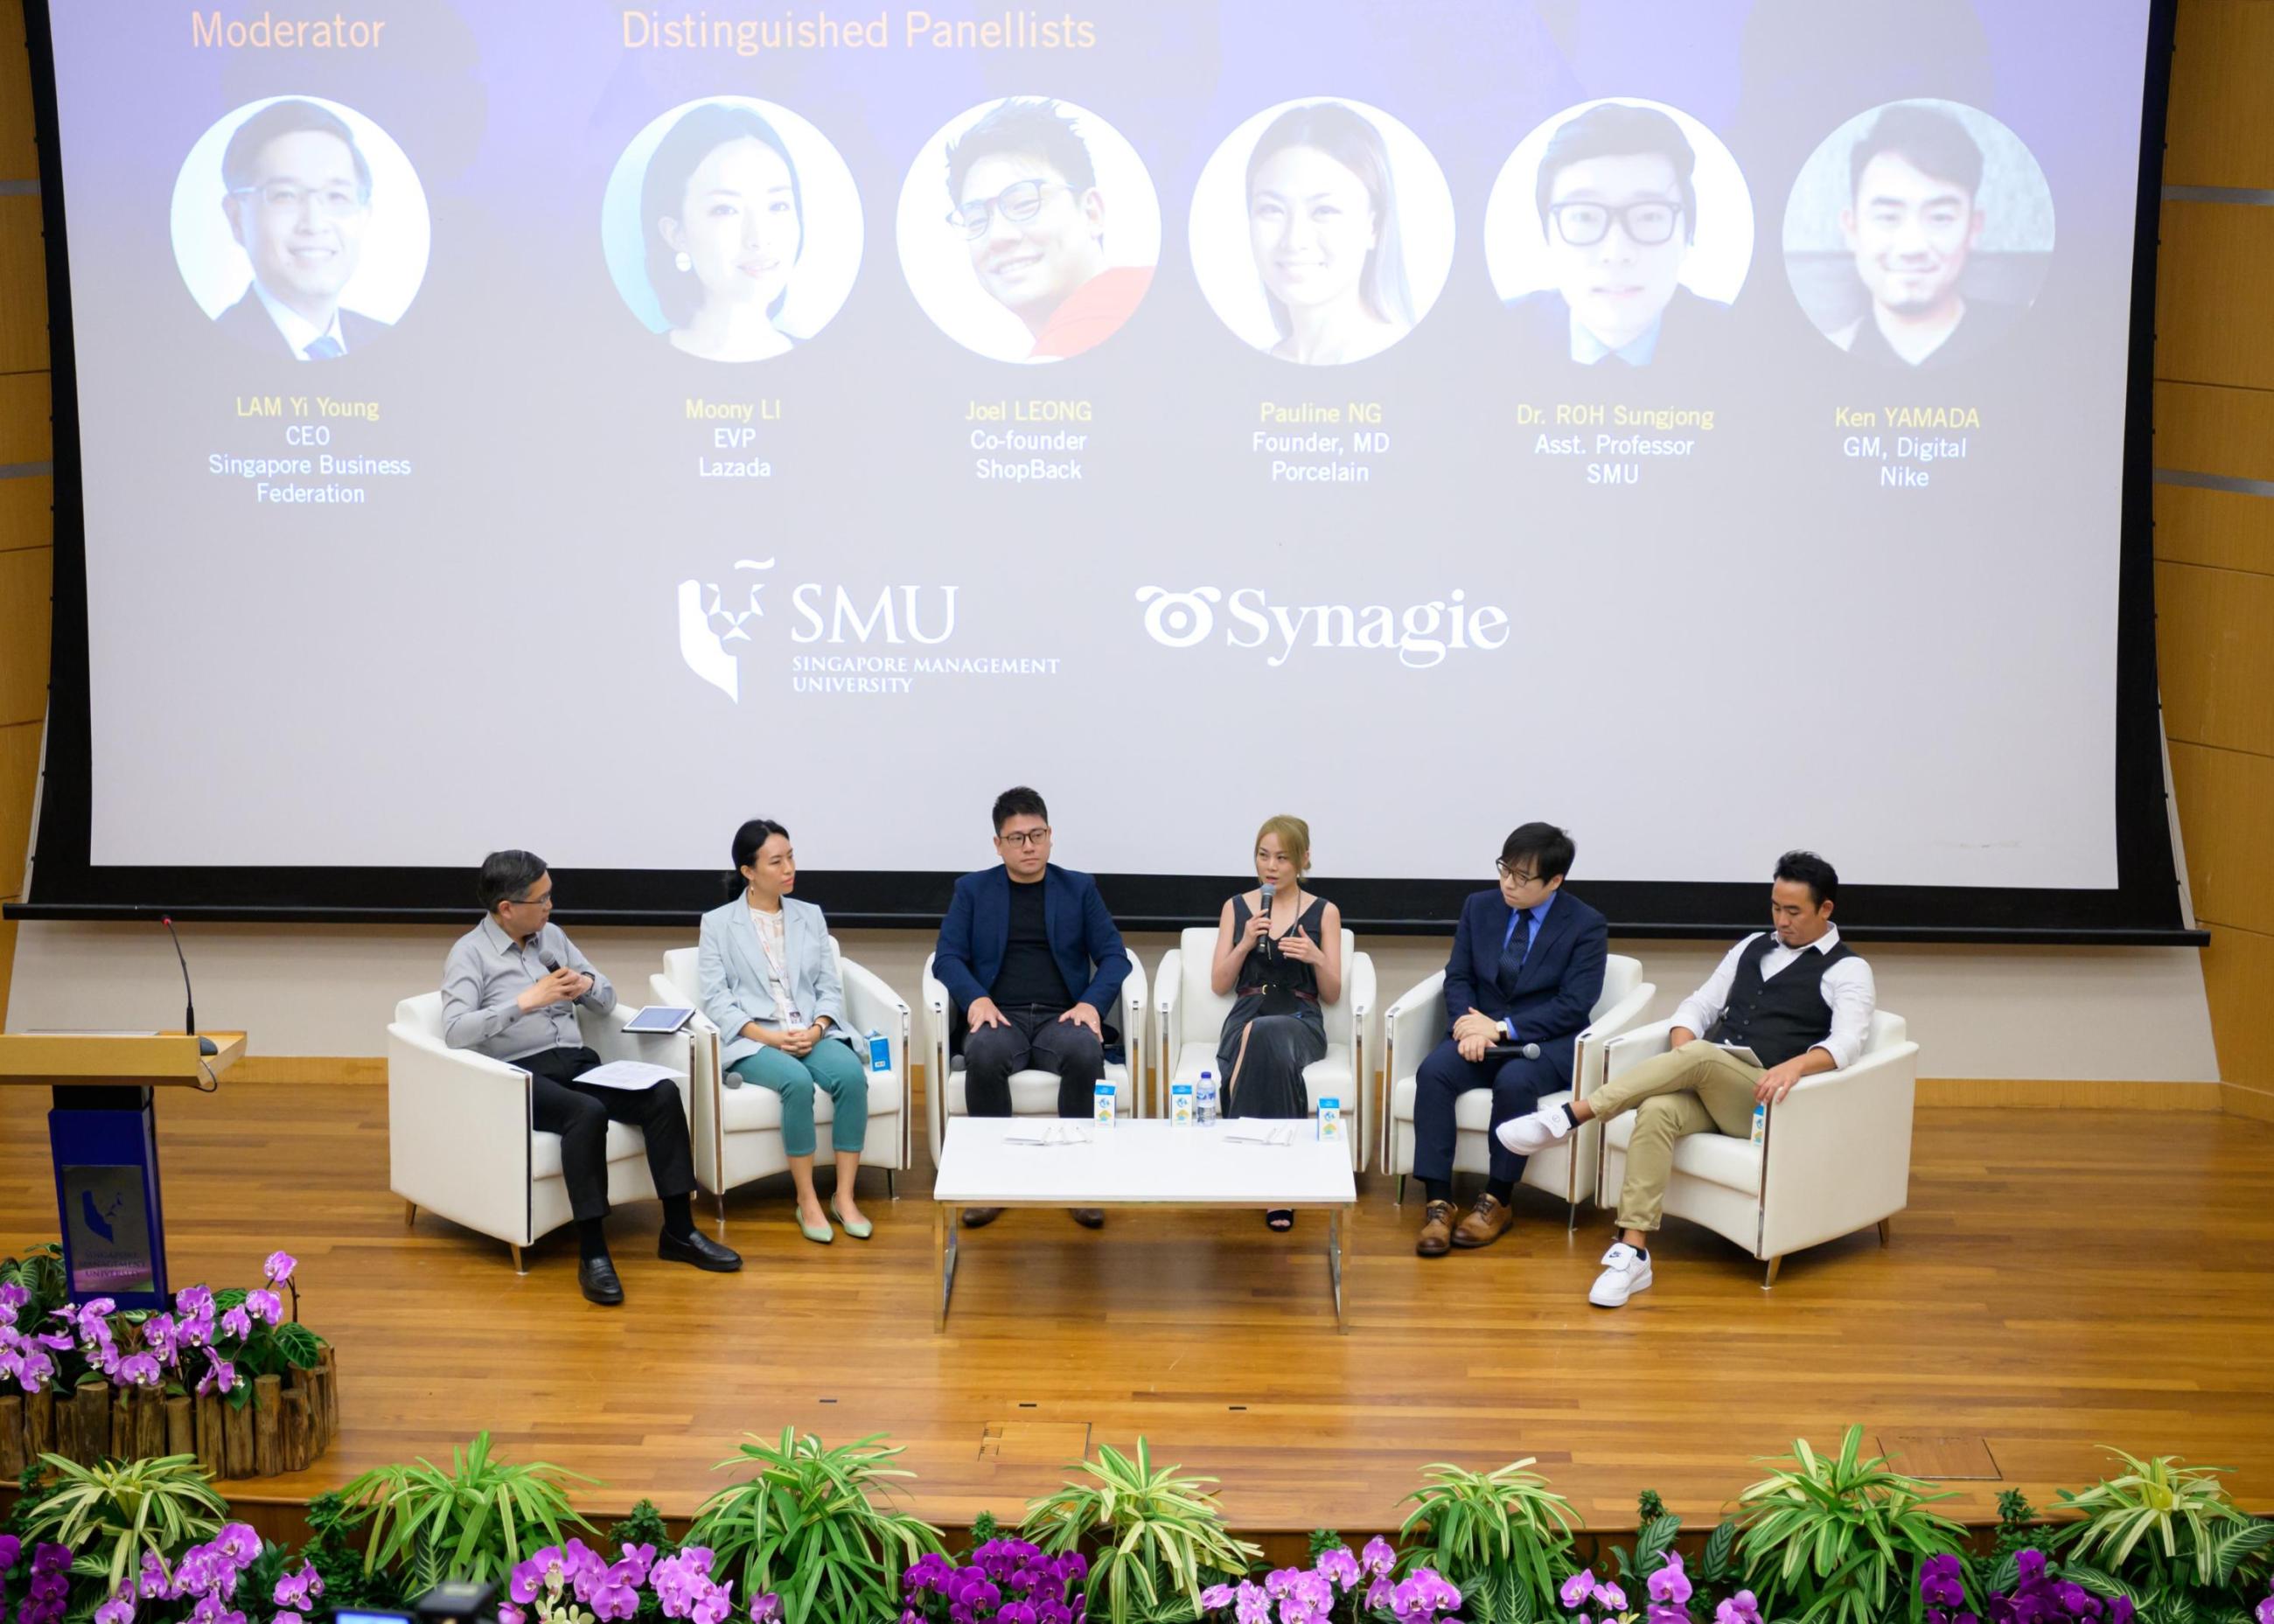 Key industry leaders discuss challenges and opportunities of the digital commerce ecosystem